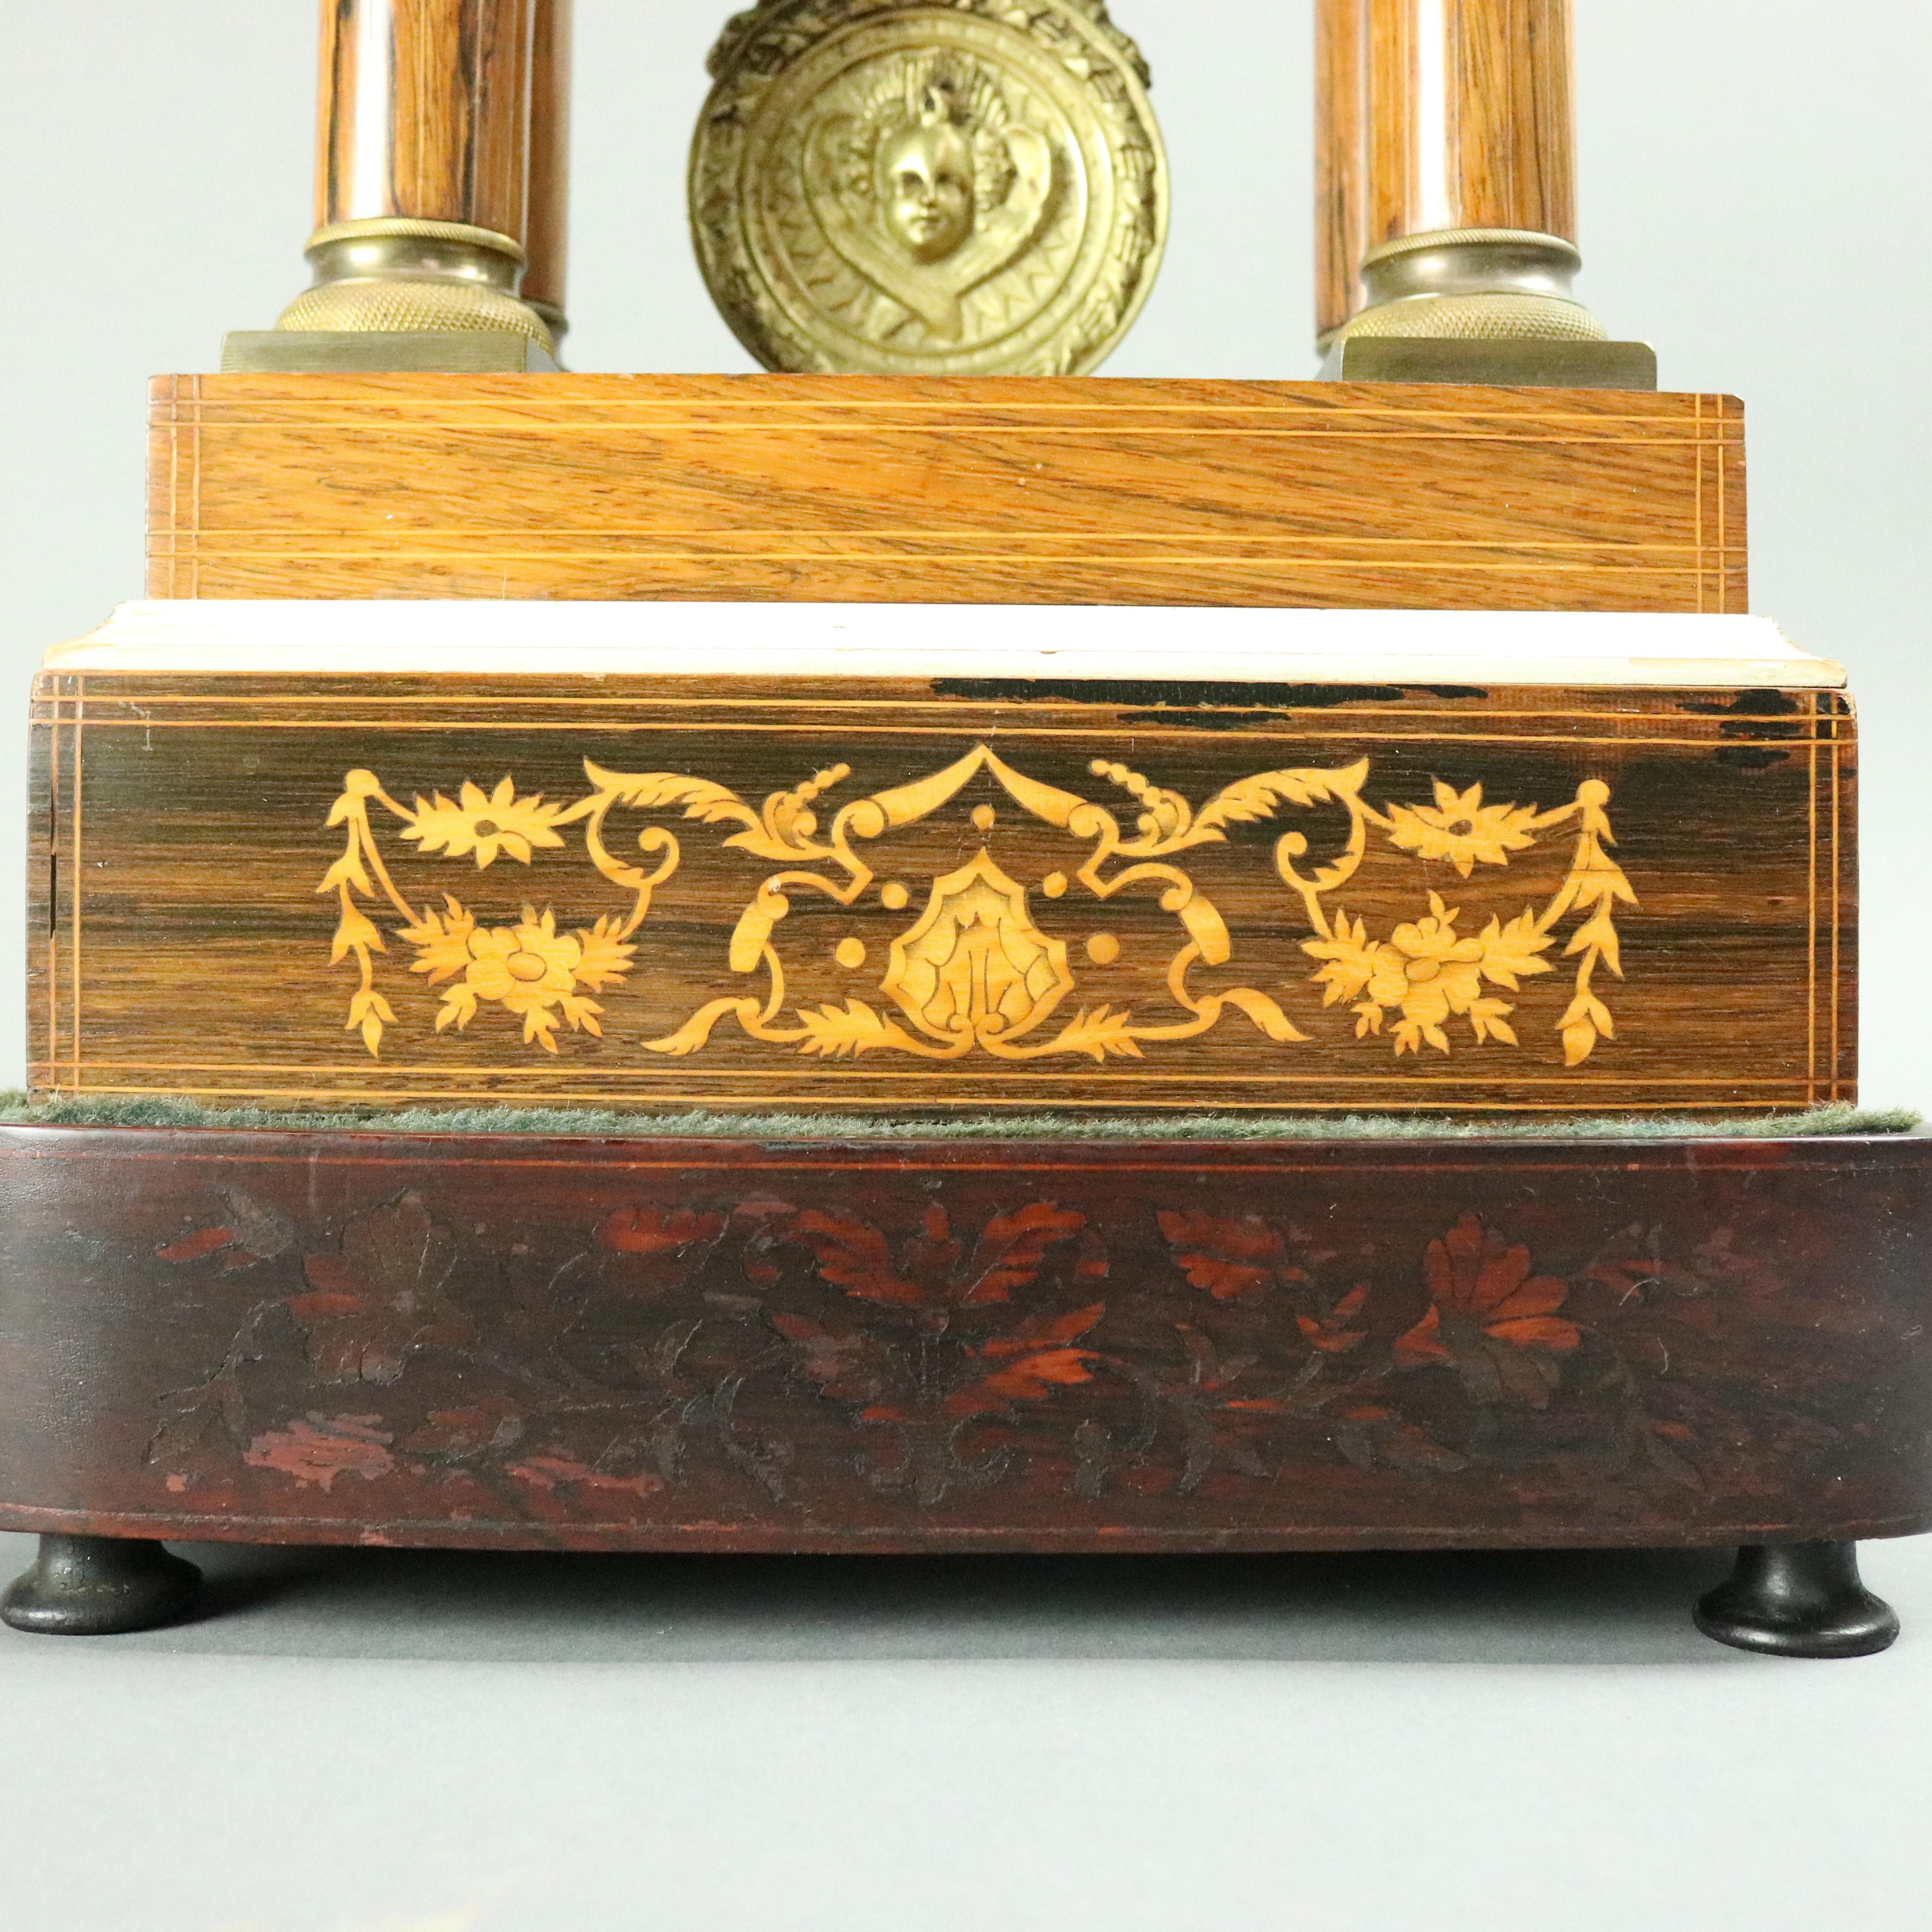 Cast French Empire Mahogany, Satinwood Marquetry and Bronze Portico Clock, circa 1855